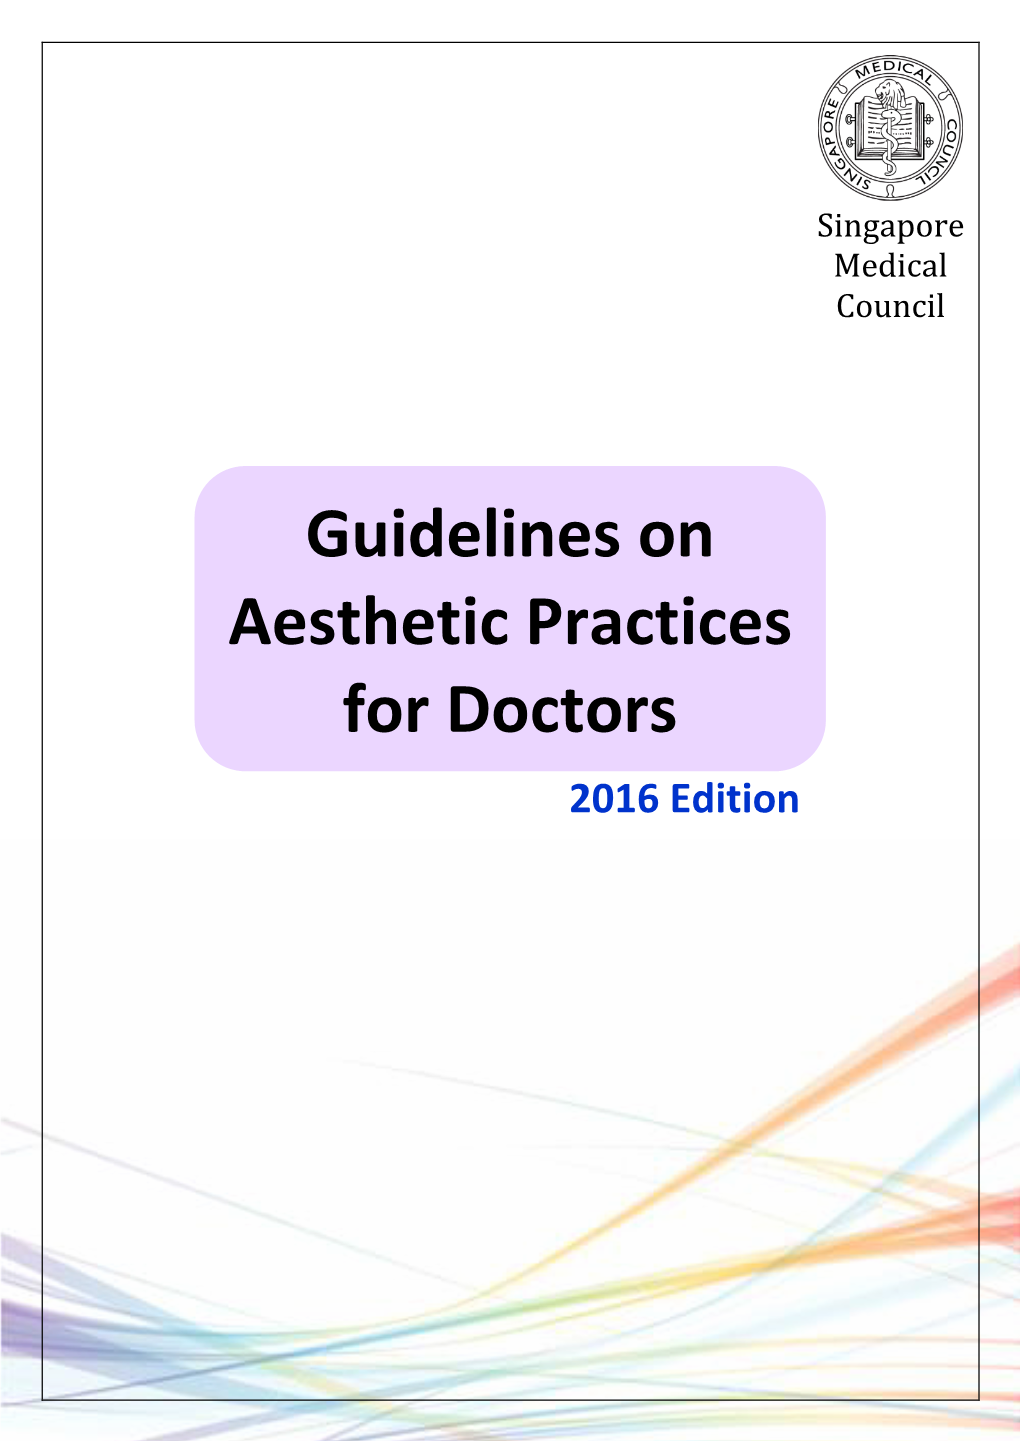 Guidelines on Aesthetic Practices for Doctors 2016 Edition